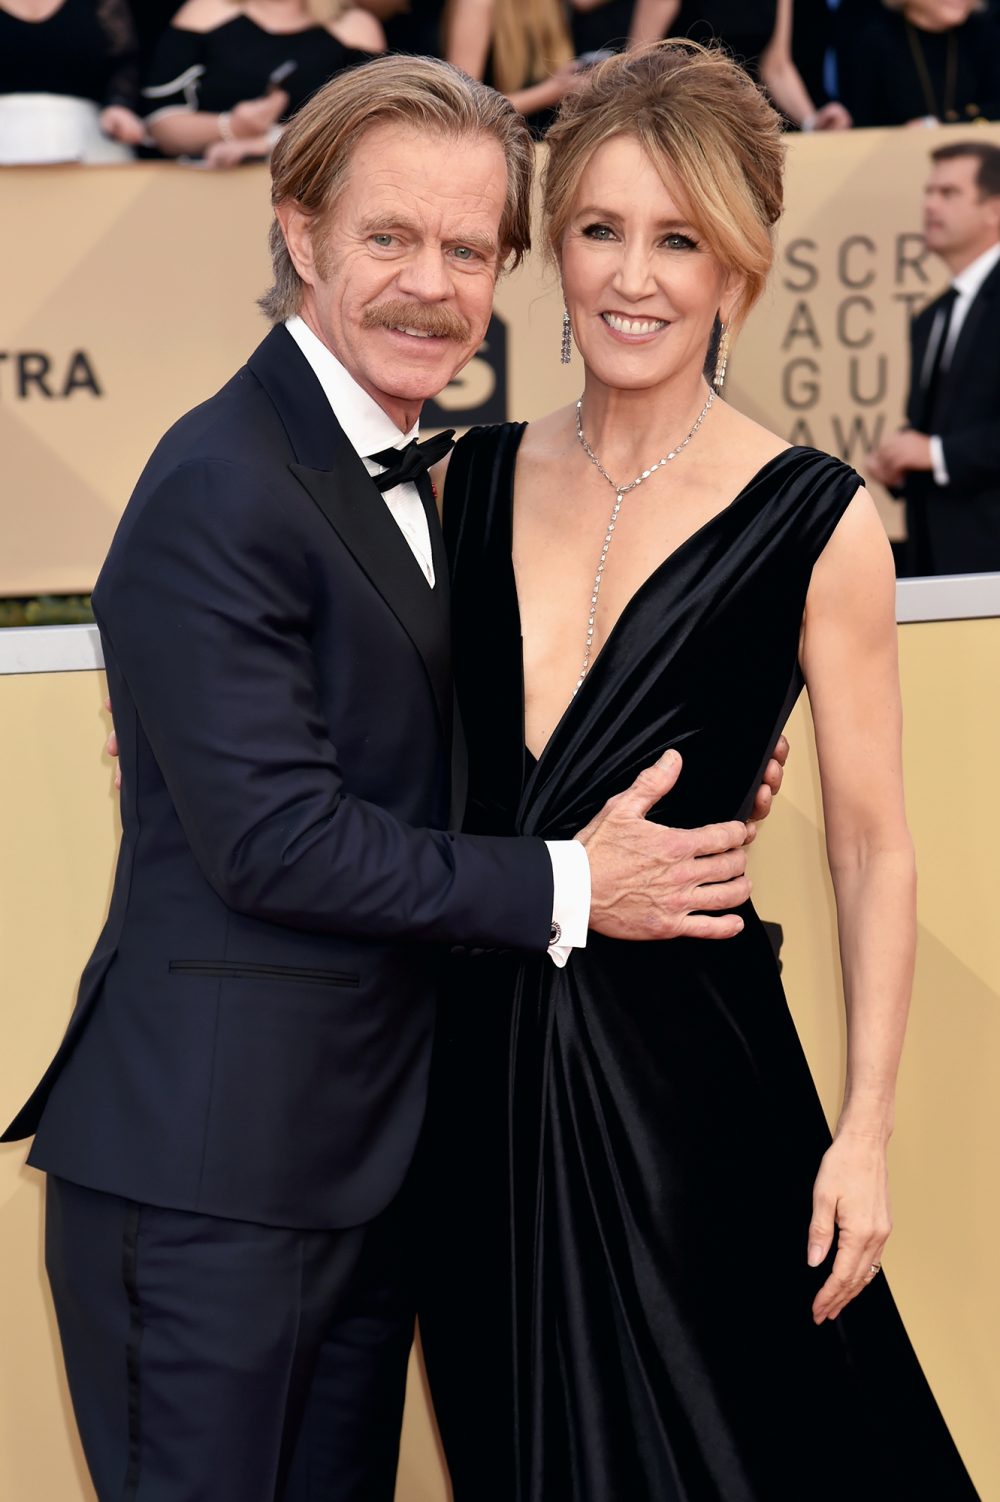 Felicity Huffman and William H. Macy 'Have Been Arguing' Amid College Admissions Scandal